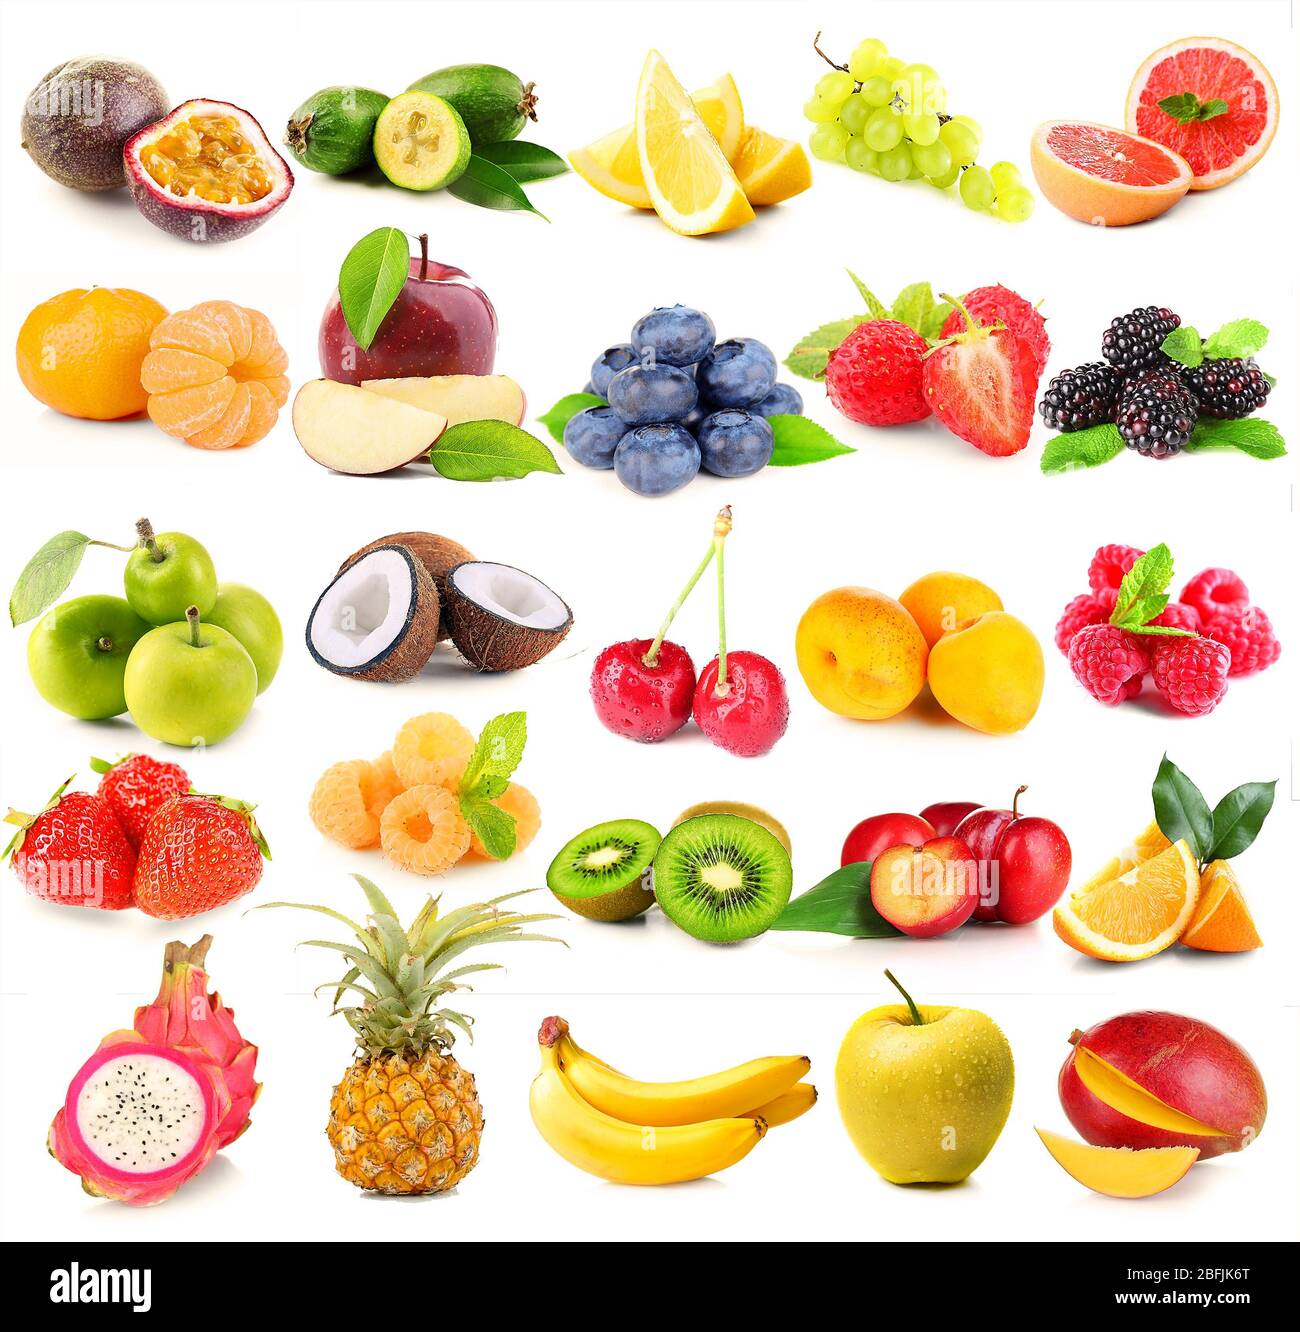 Collage of different fruits and berries isolated on white Stock Photo